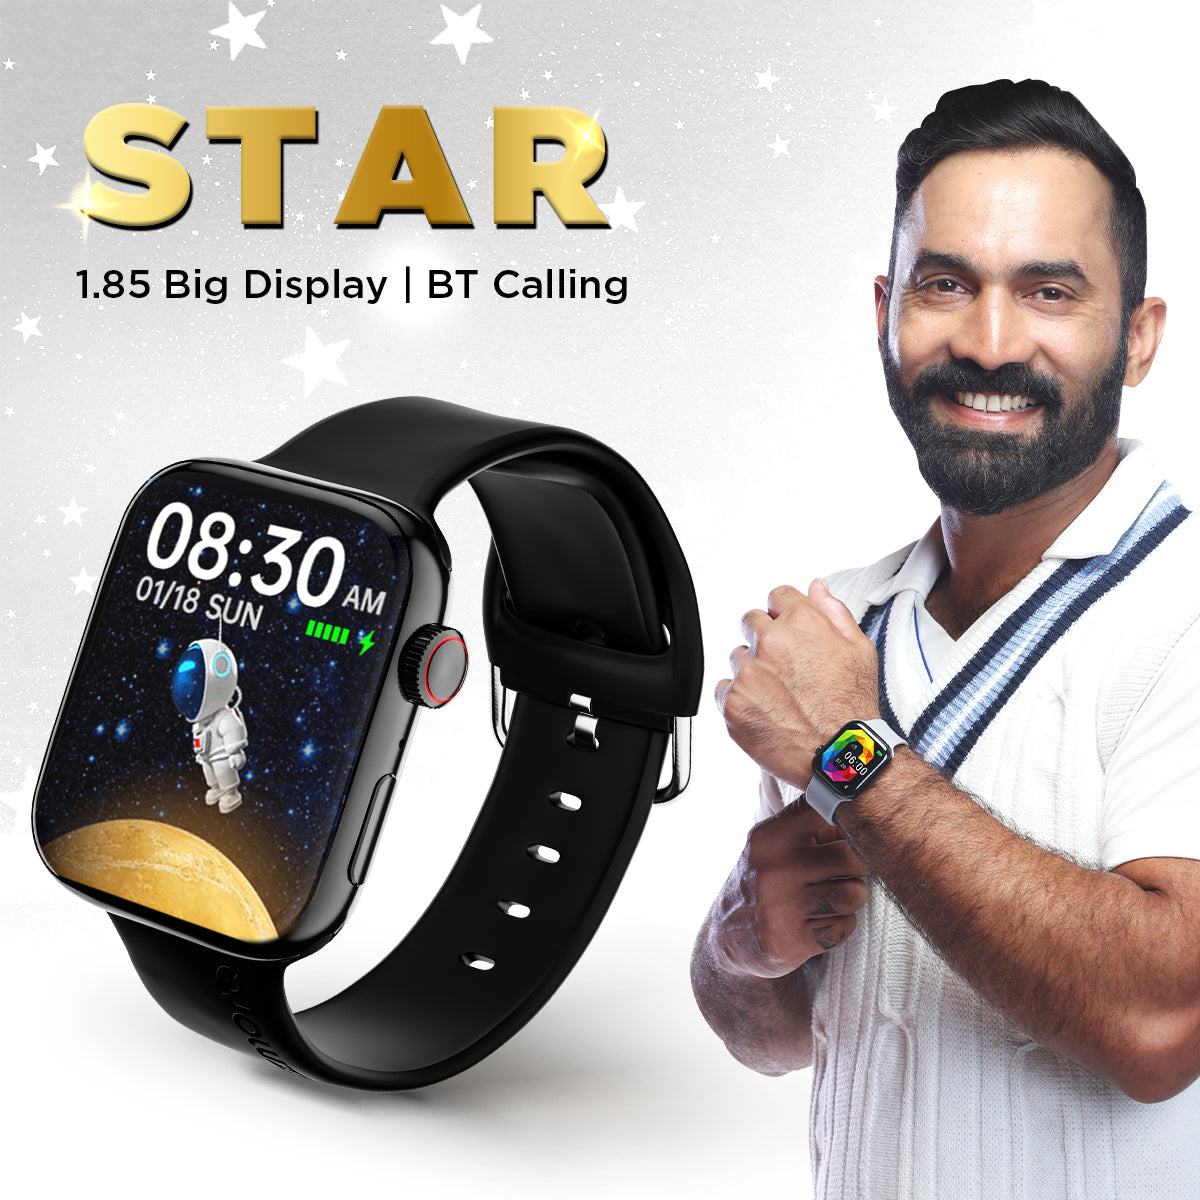 GIZMORE Star 1.85 inch (4.69 cm) IPS Large Display with Rotating Crown Controls| AI Voice Assistant | Bluetooth Calling Smartwatch